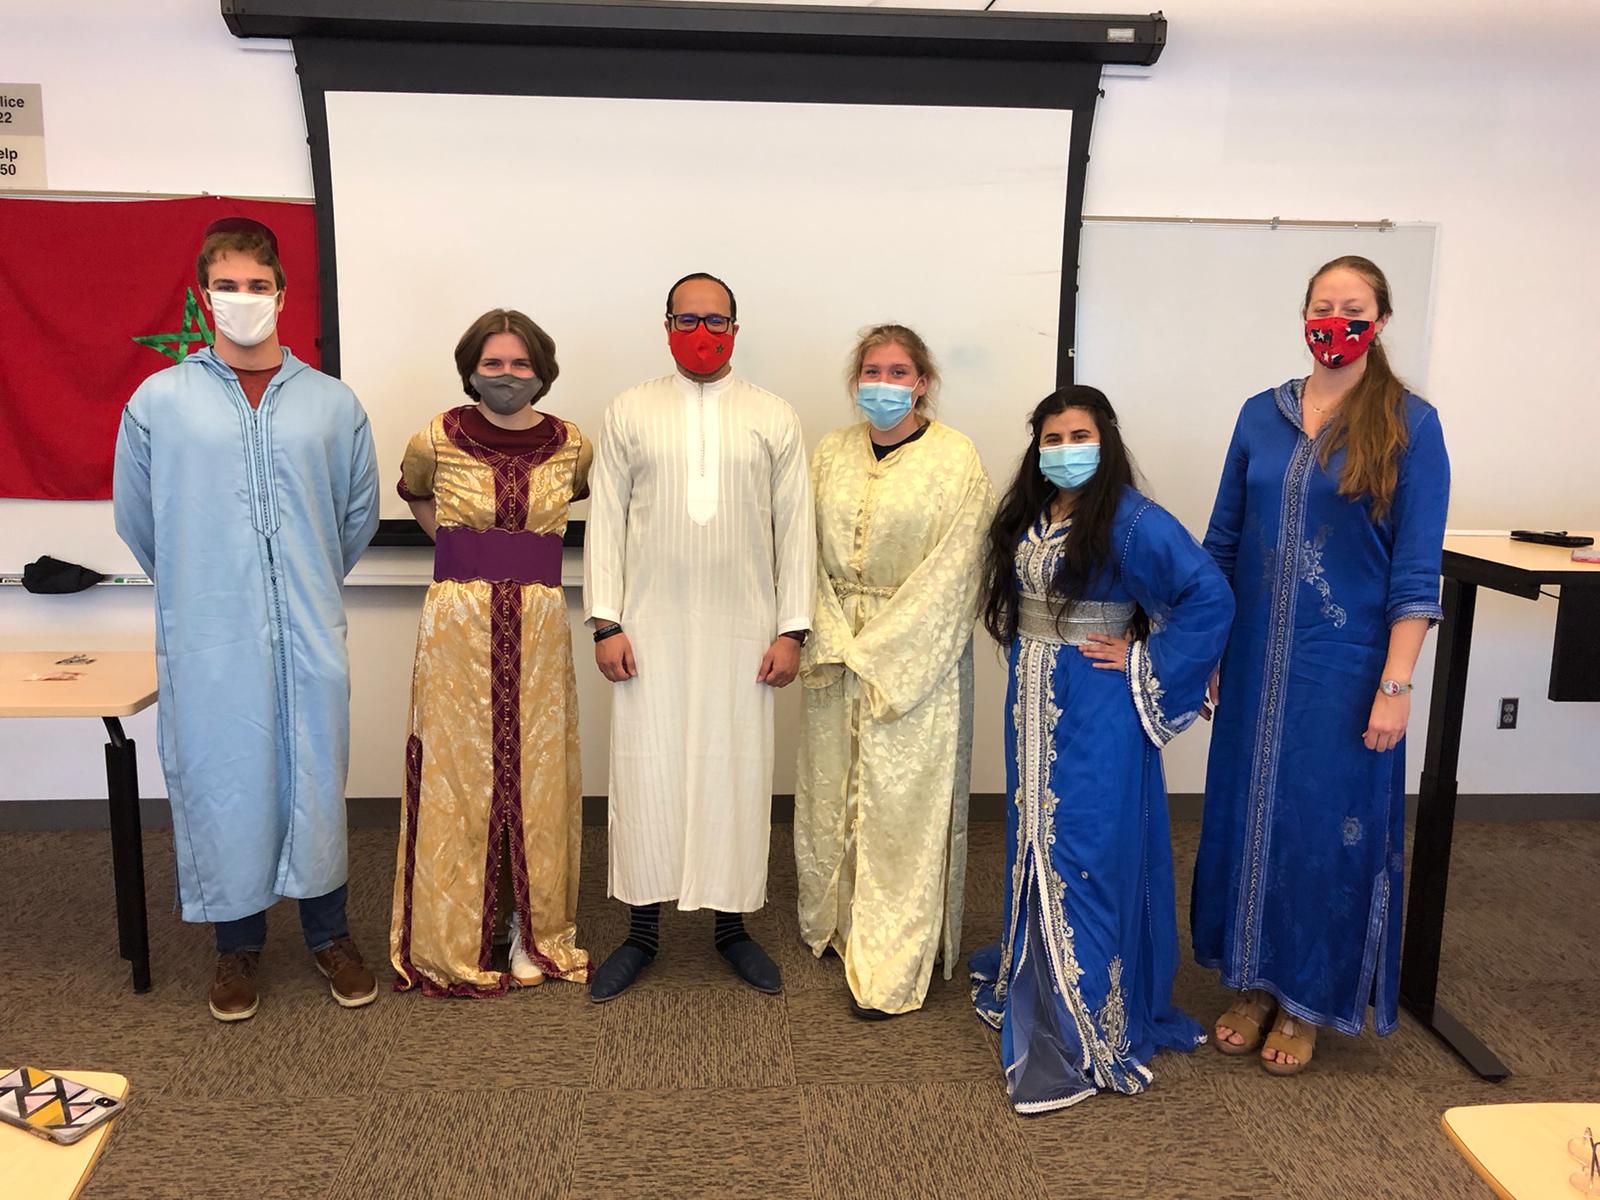 Group photo in Moroccan cultural garments